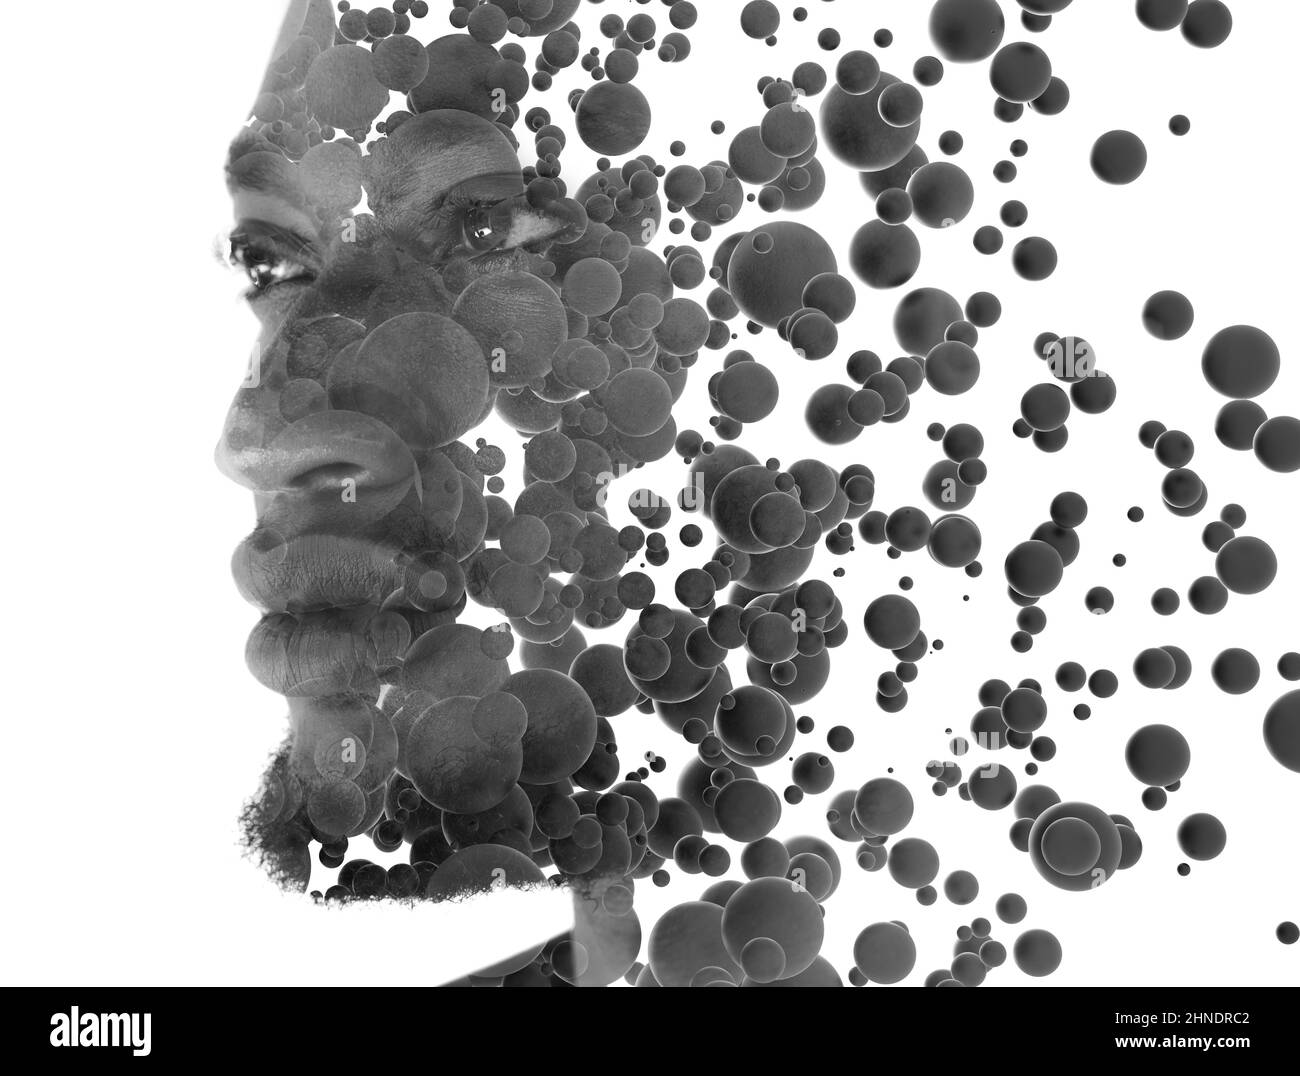 A portrait of an African American man combined with floating 3D spheres. Stock Photo